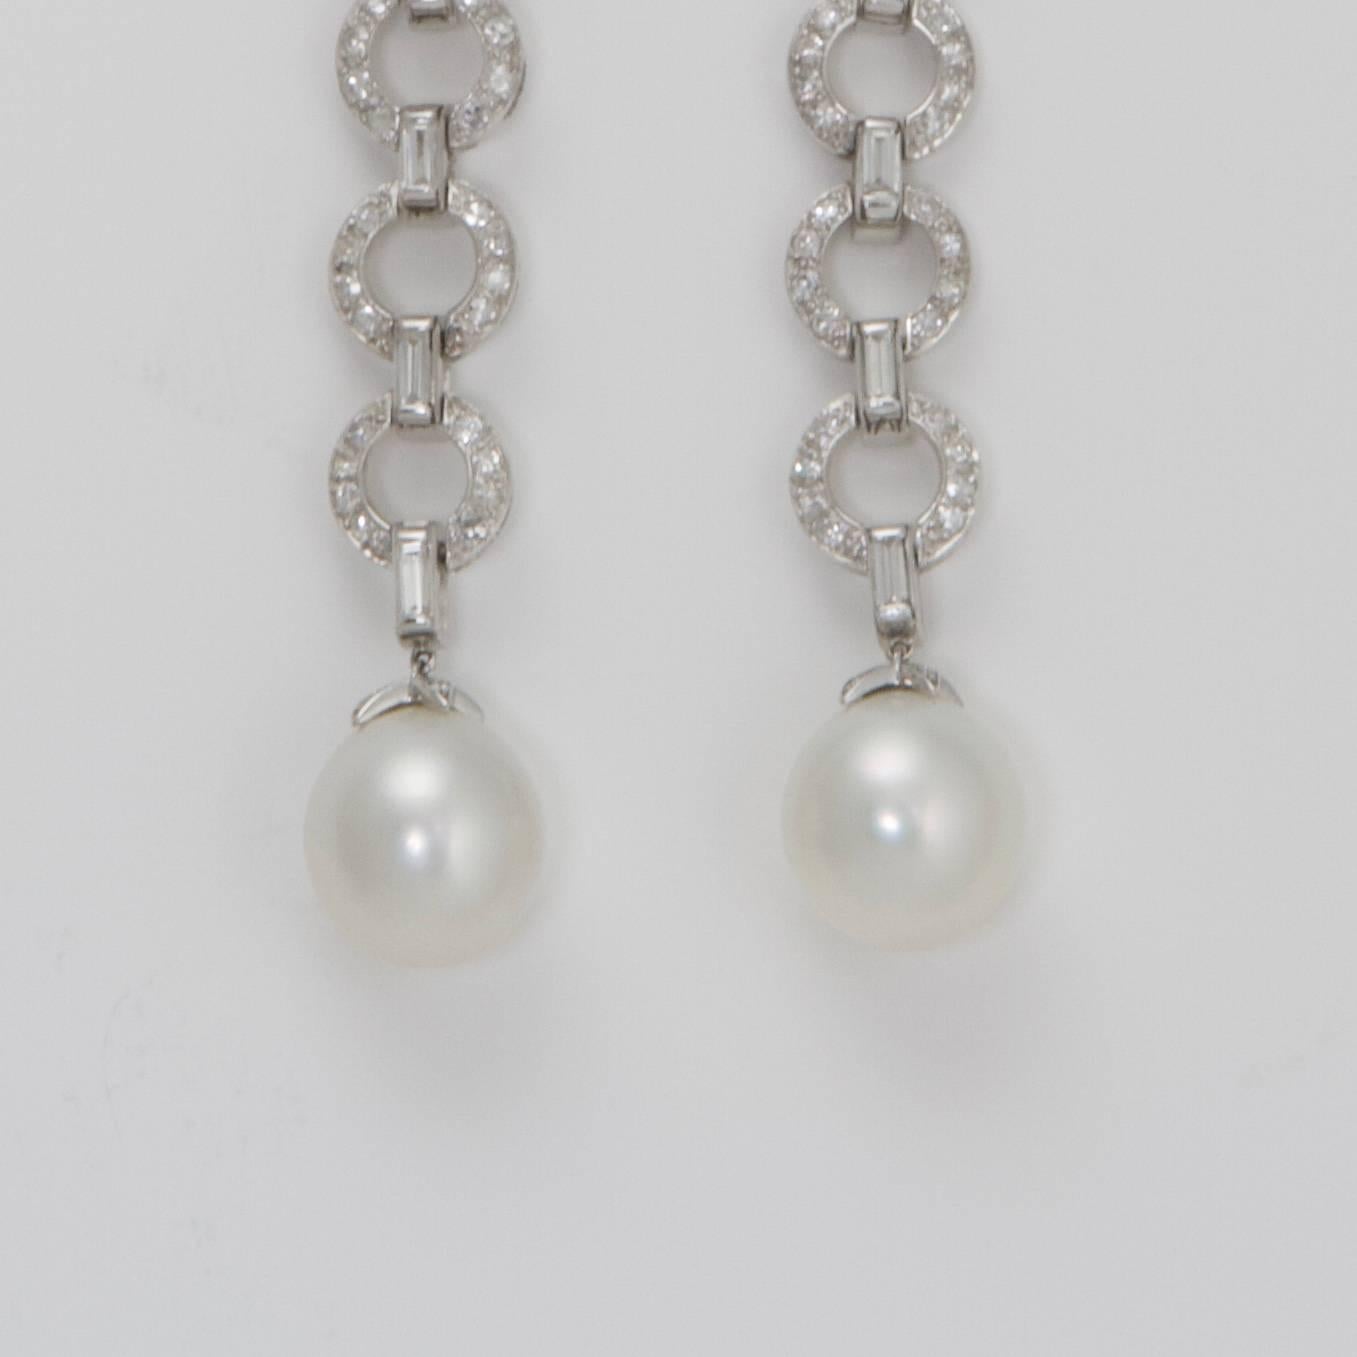 Women's or Men's Art Deco Diamond and Cultured-Pearl Earrings from Paris, 1925 For Sale